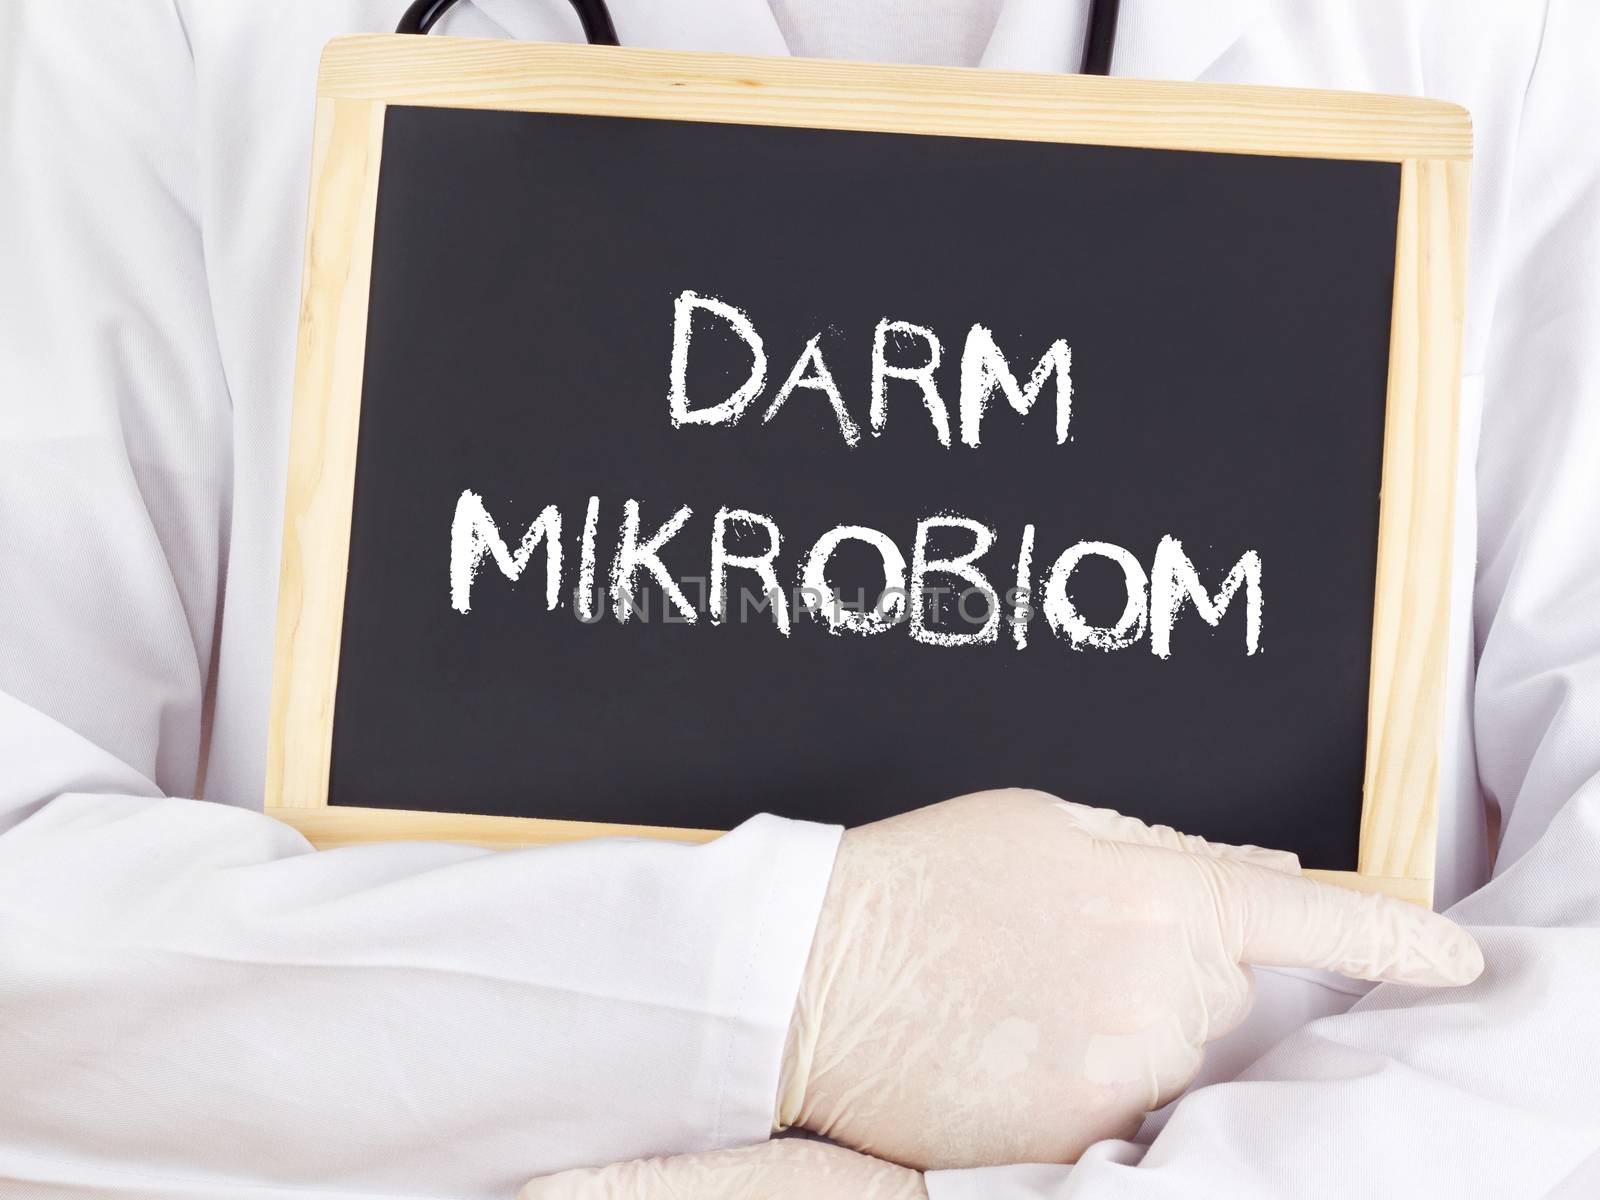 Doctor shows information: bowel microbiome in german by gwolters